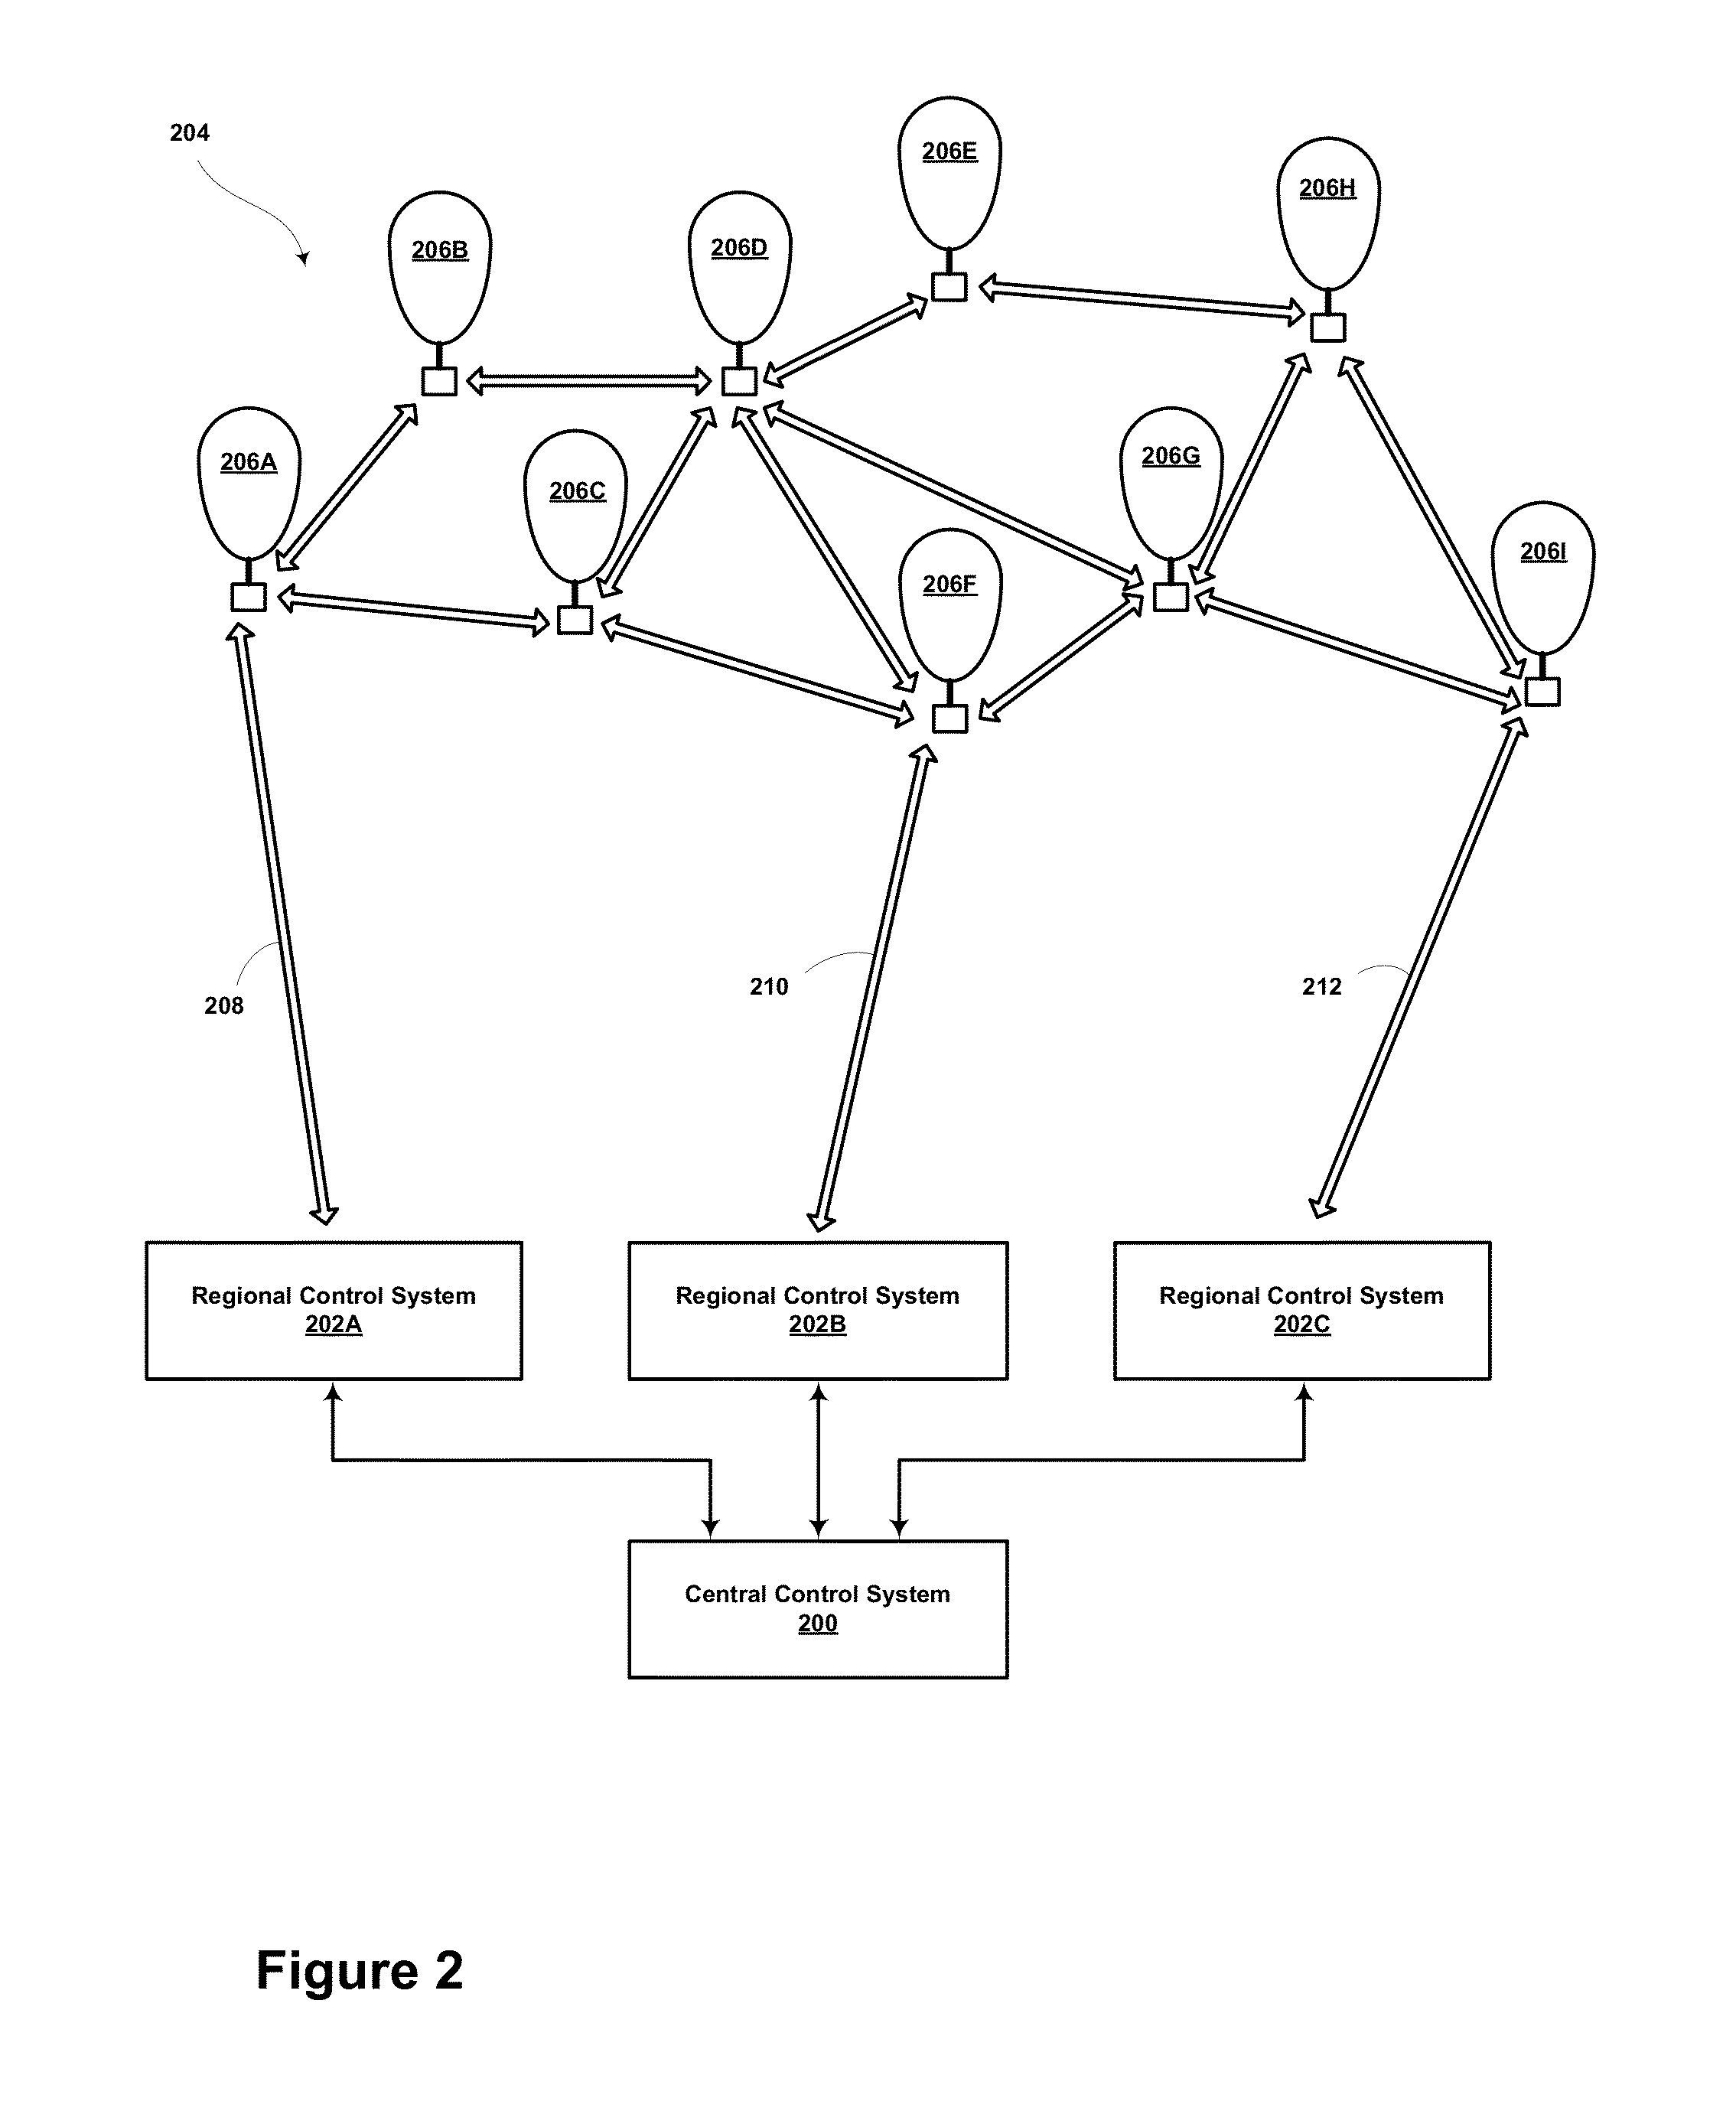 Virtual pooling of local resources in a balloon network